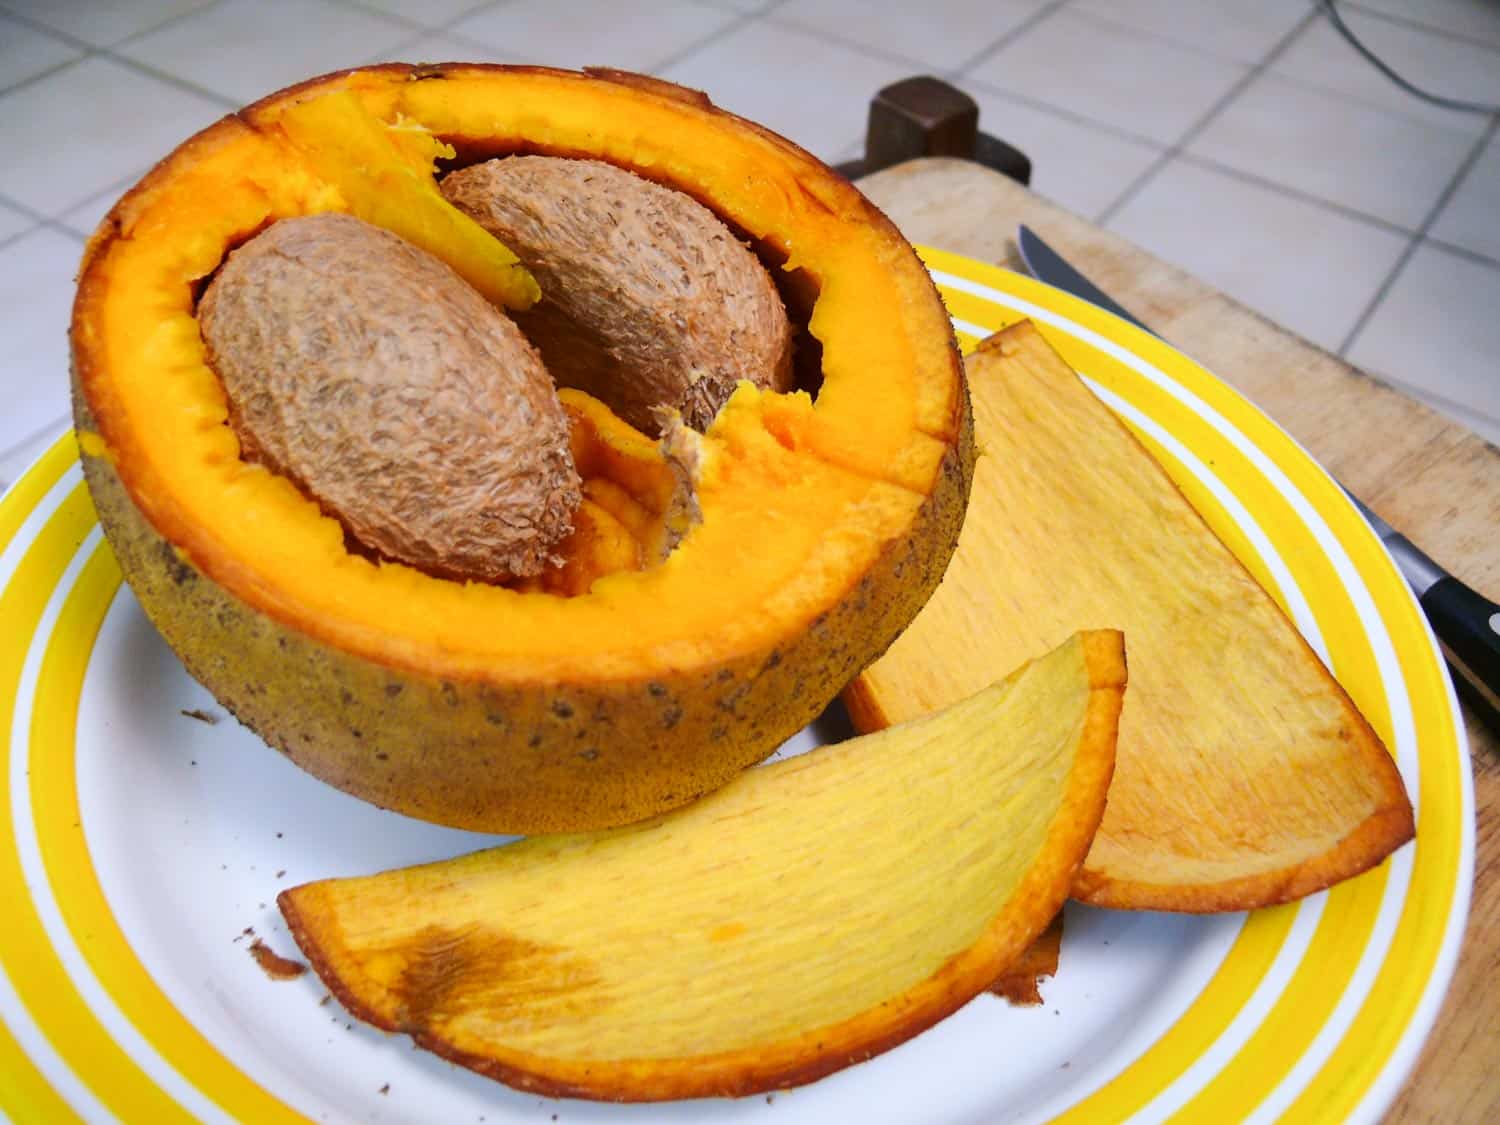 Jamaican fruit mammee apple peeled and sliced on a plate to show its interior.